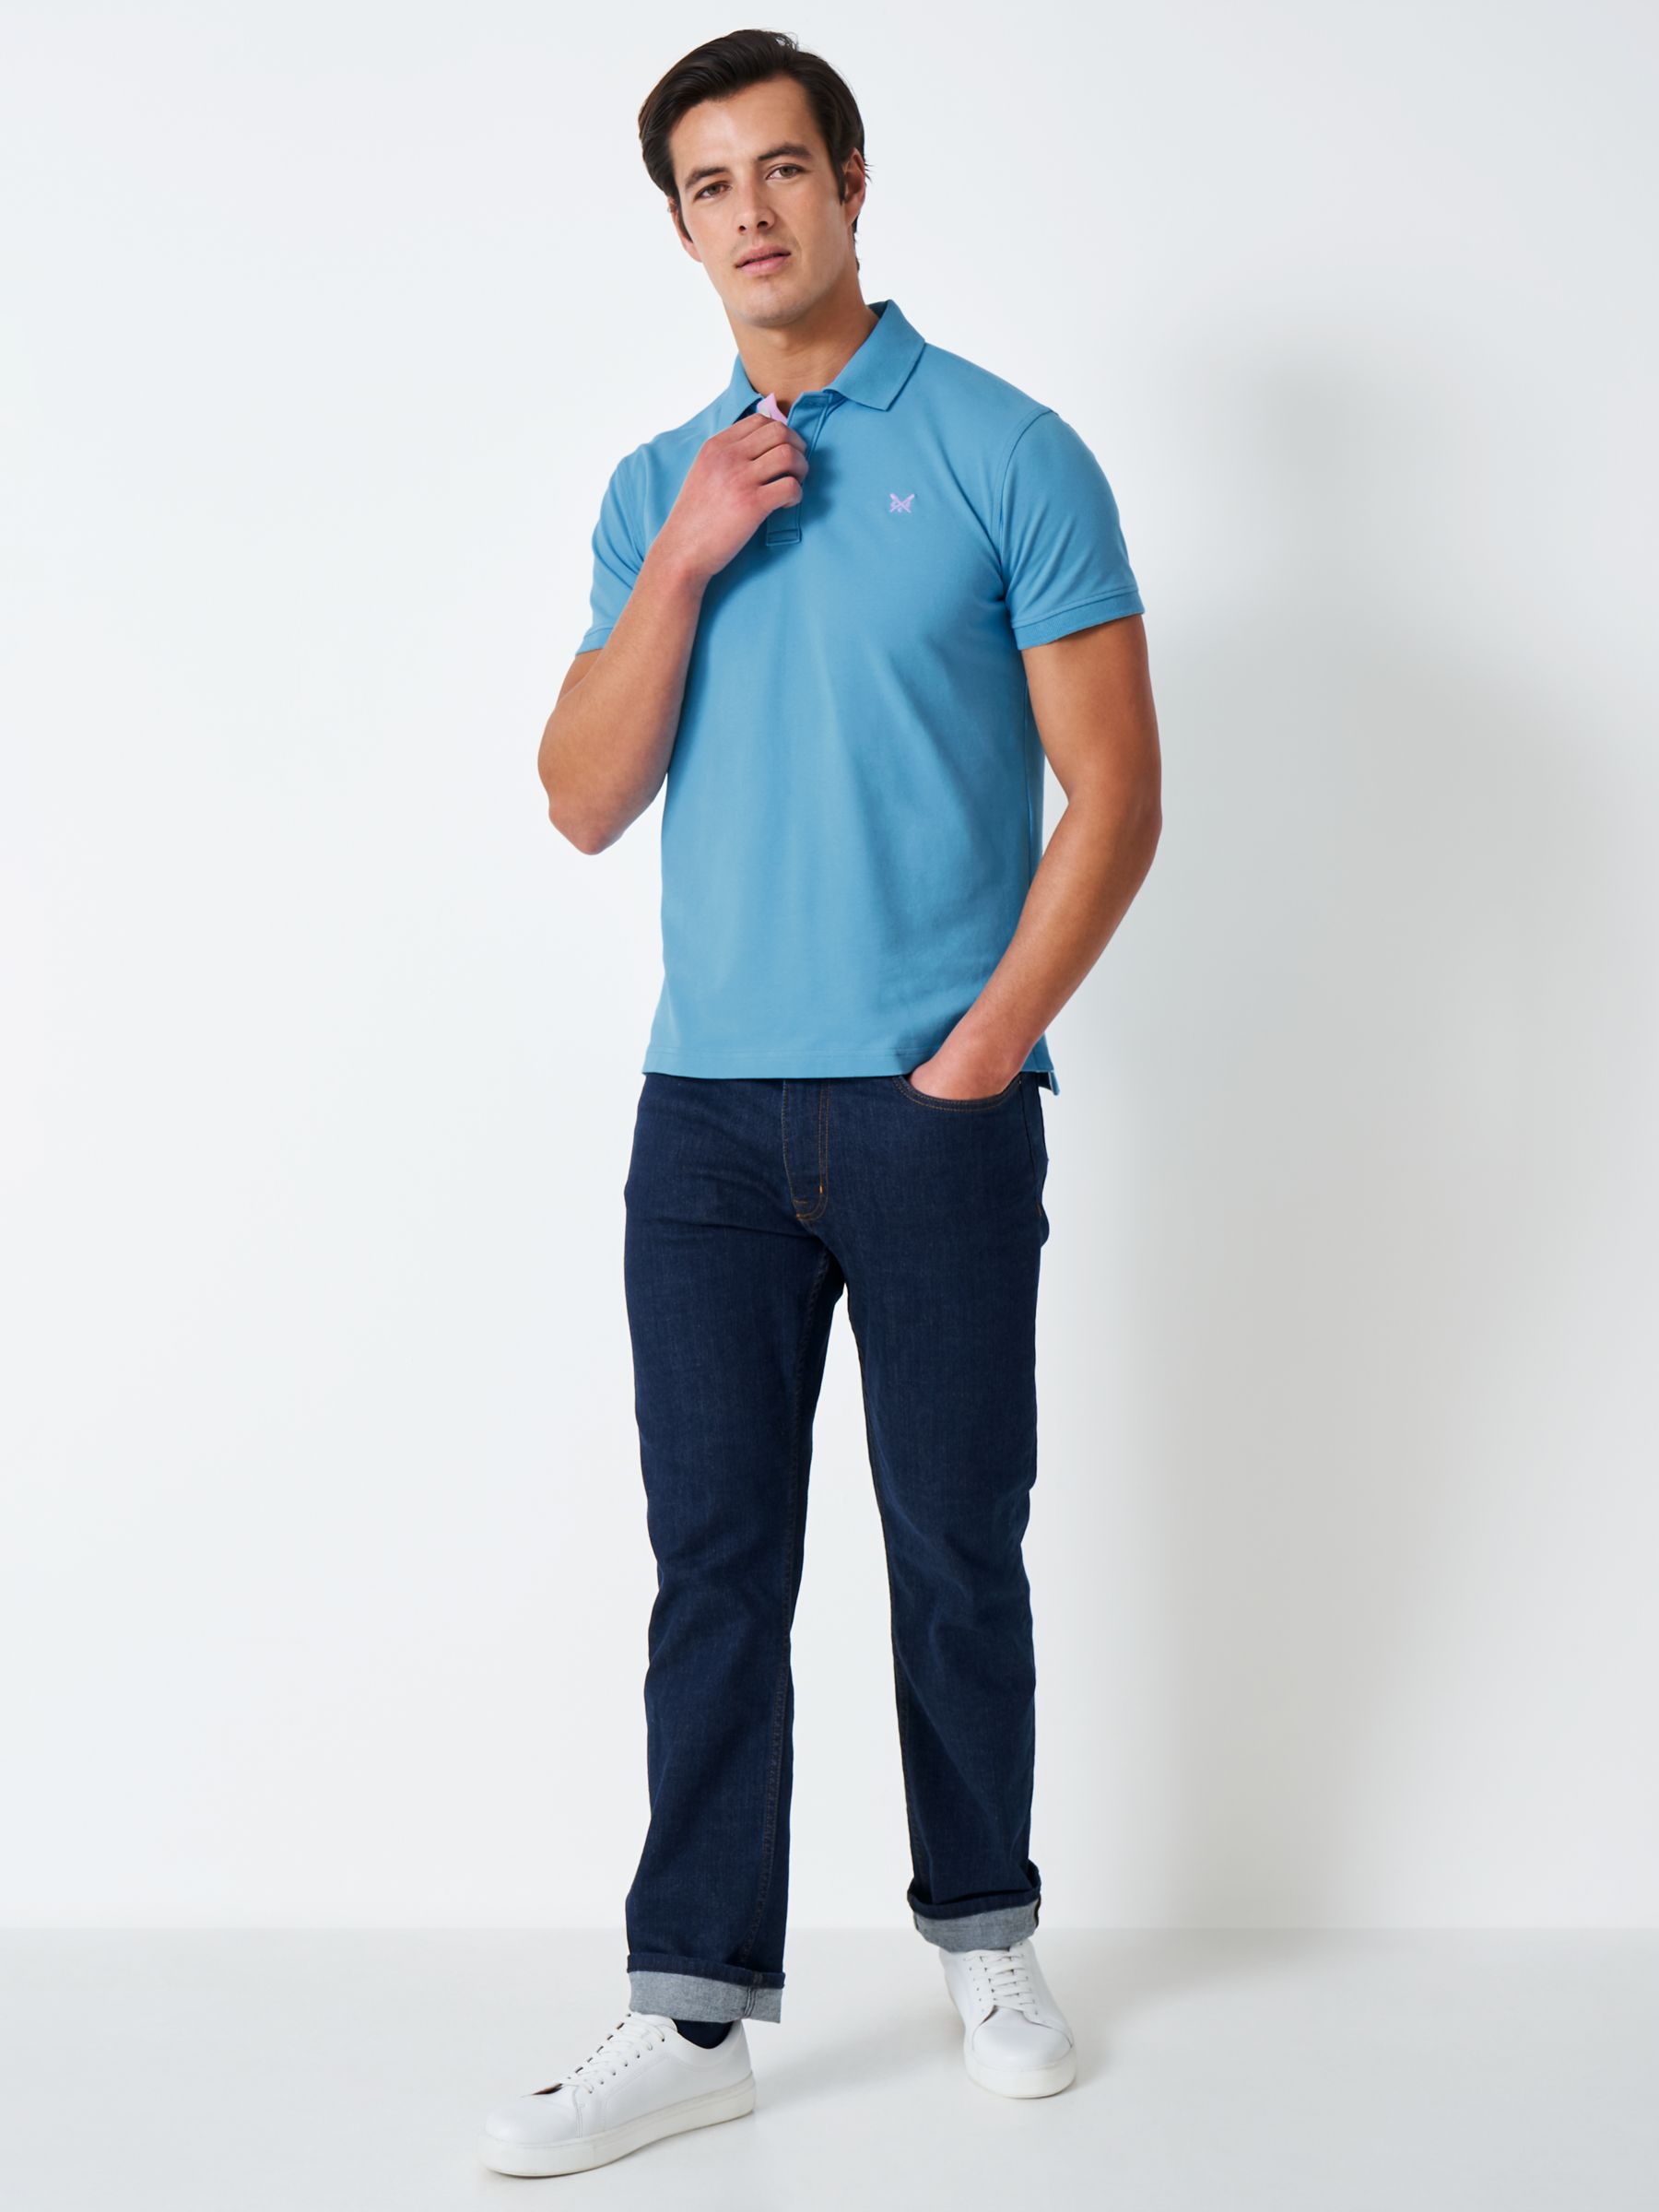 Crew Clothing Piqué Short Polo Sleeve John Bright Partners & at Blue Top, Lewis